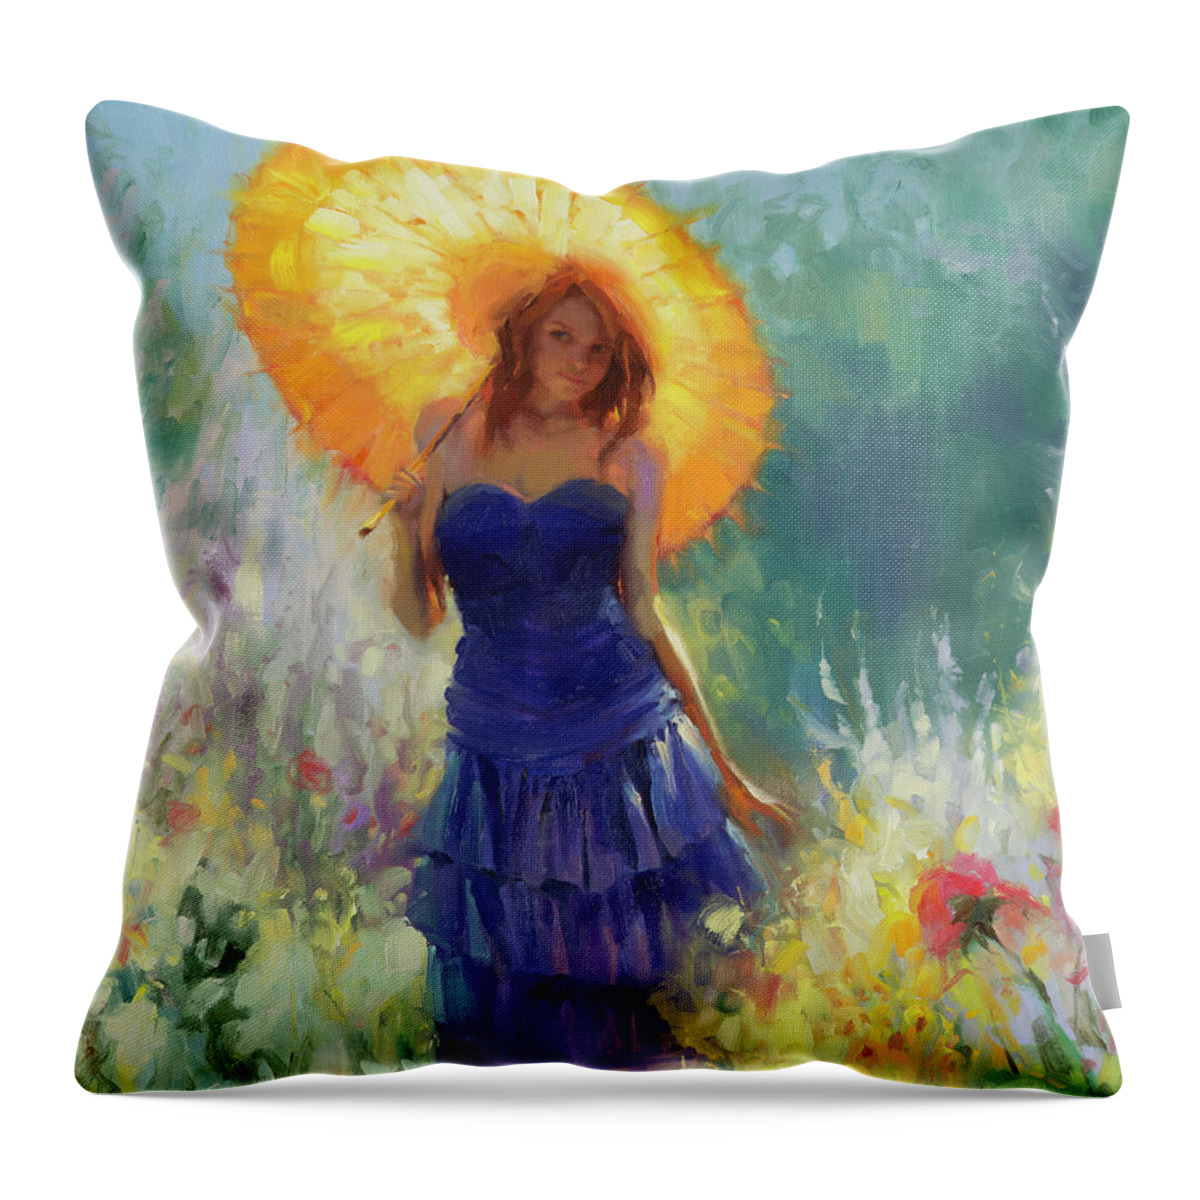 Woman Throw Pillow featuring the painting Promenade by Steve Henderson